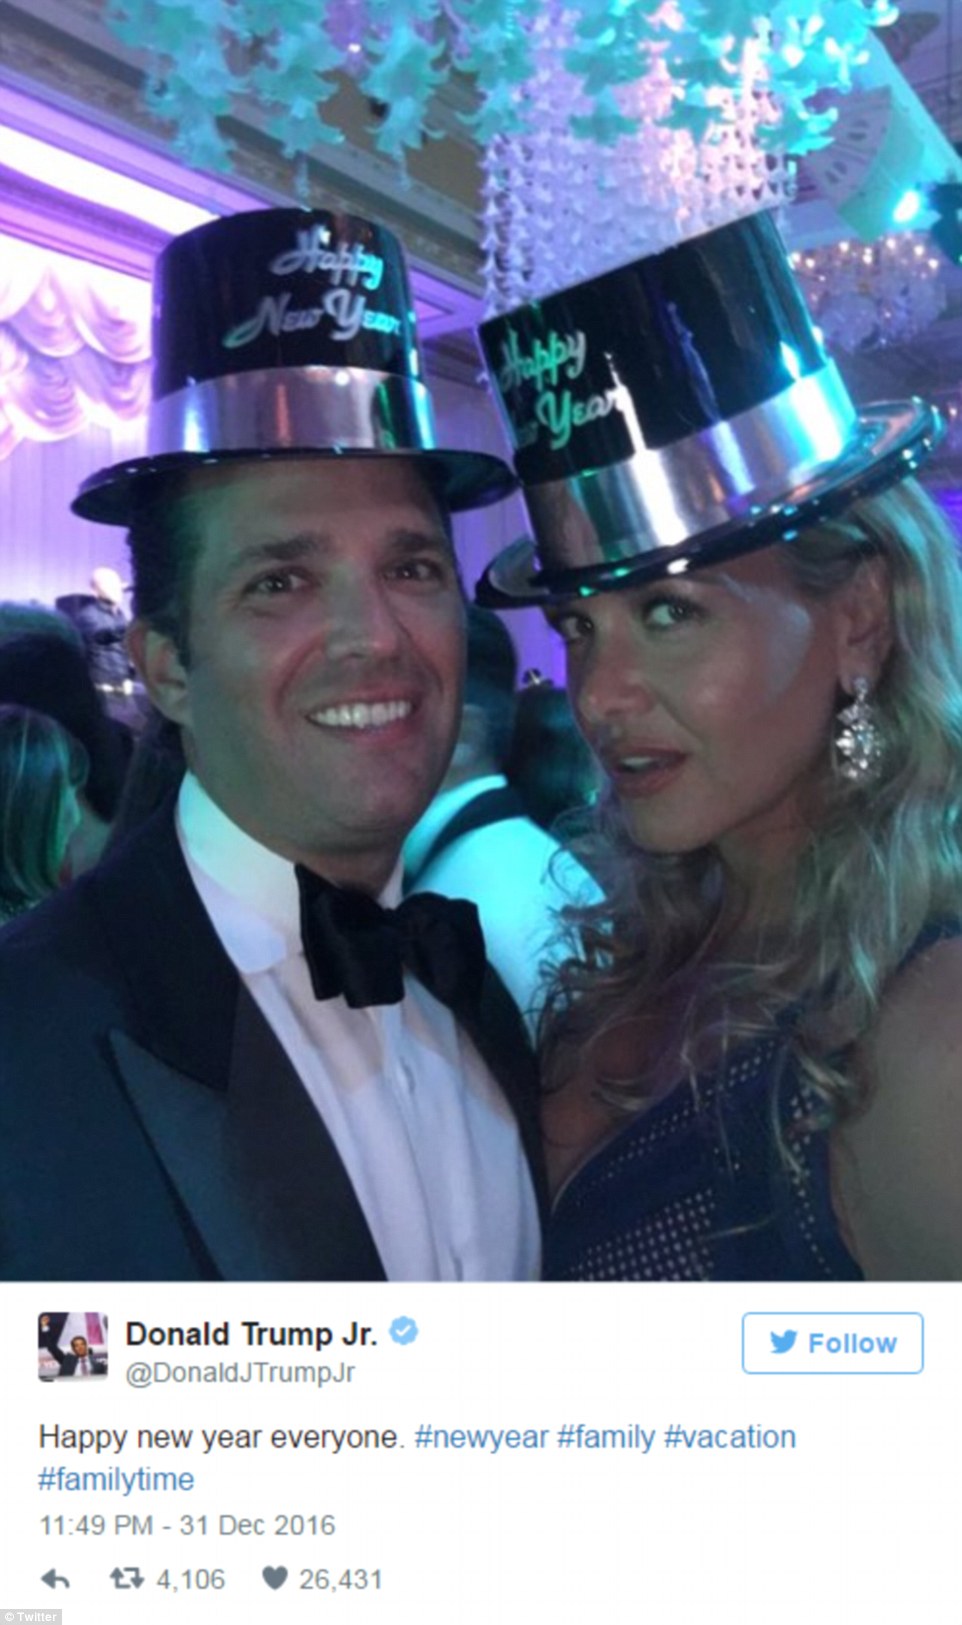 Ringing it in: Donald Trump Jr. was also on hand with his wife Vanessa at the celebration